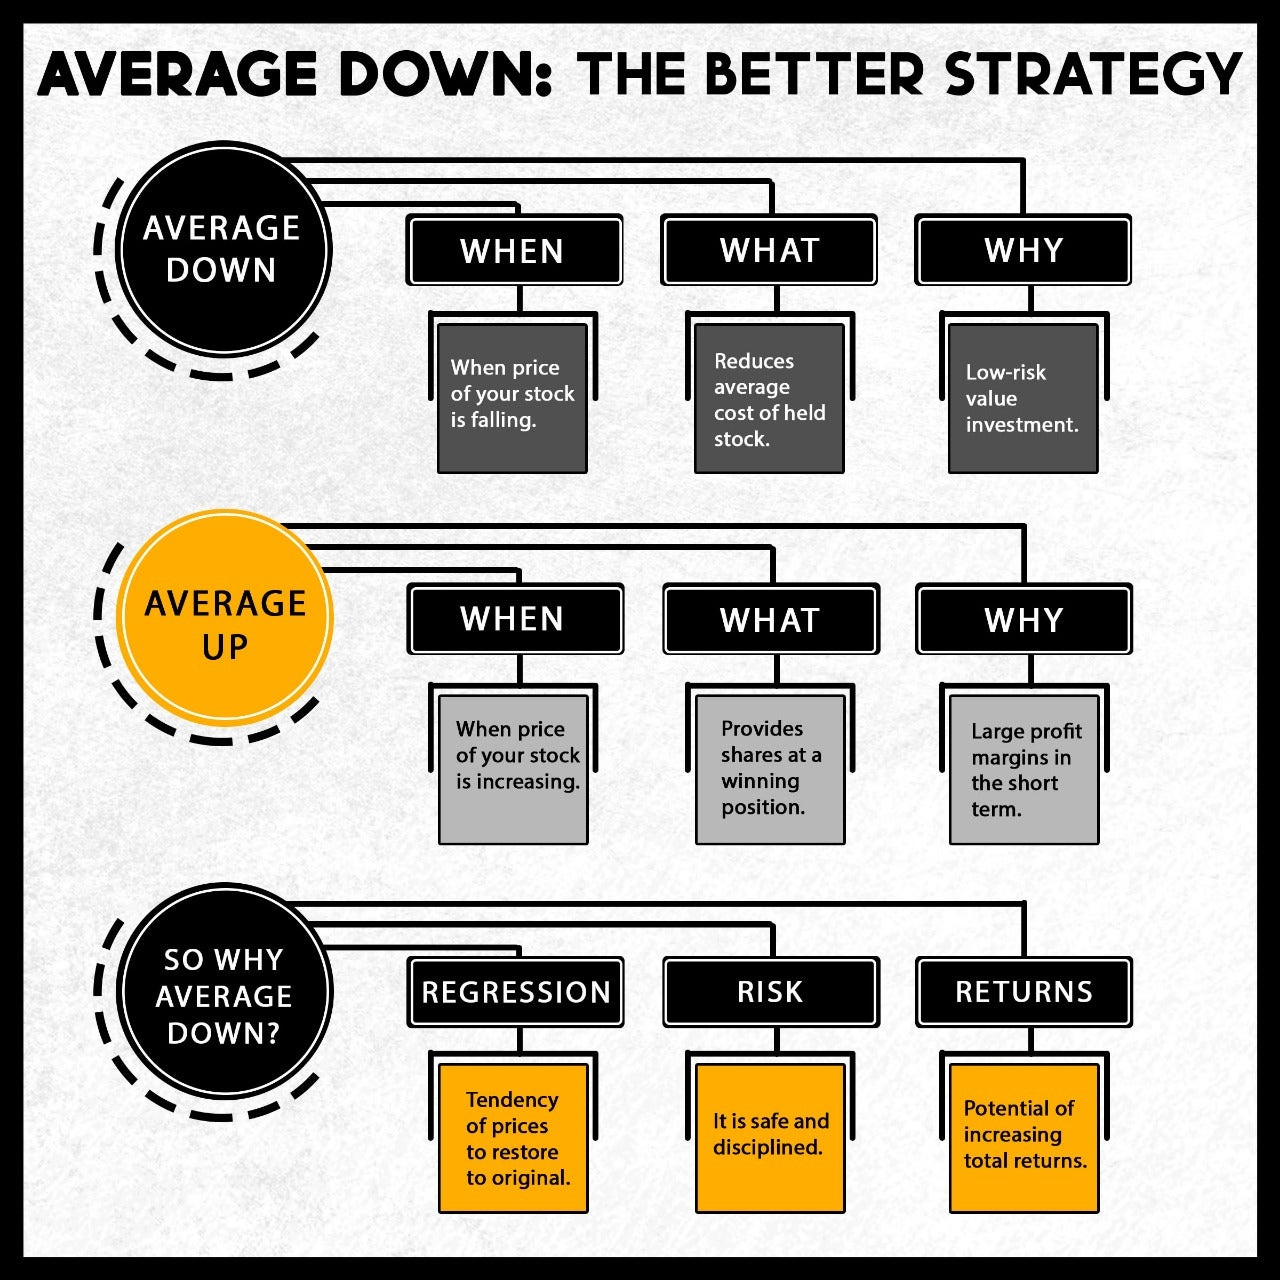 Why Average Down is still a viable strategy: TheCorporateOutlook